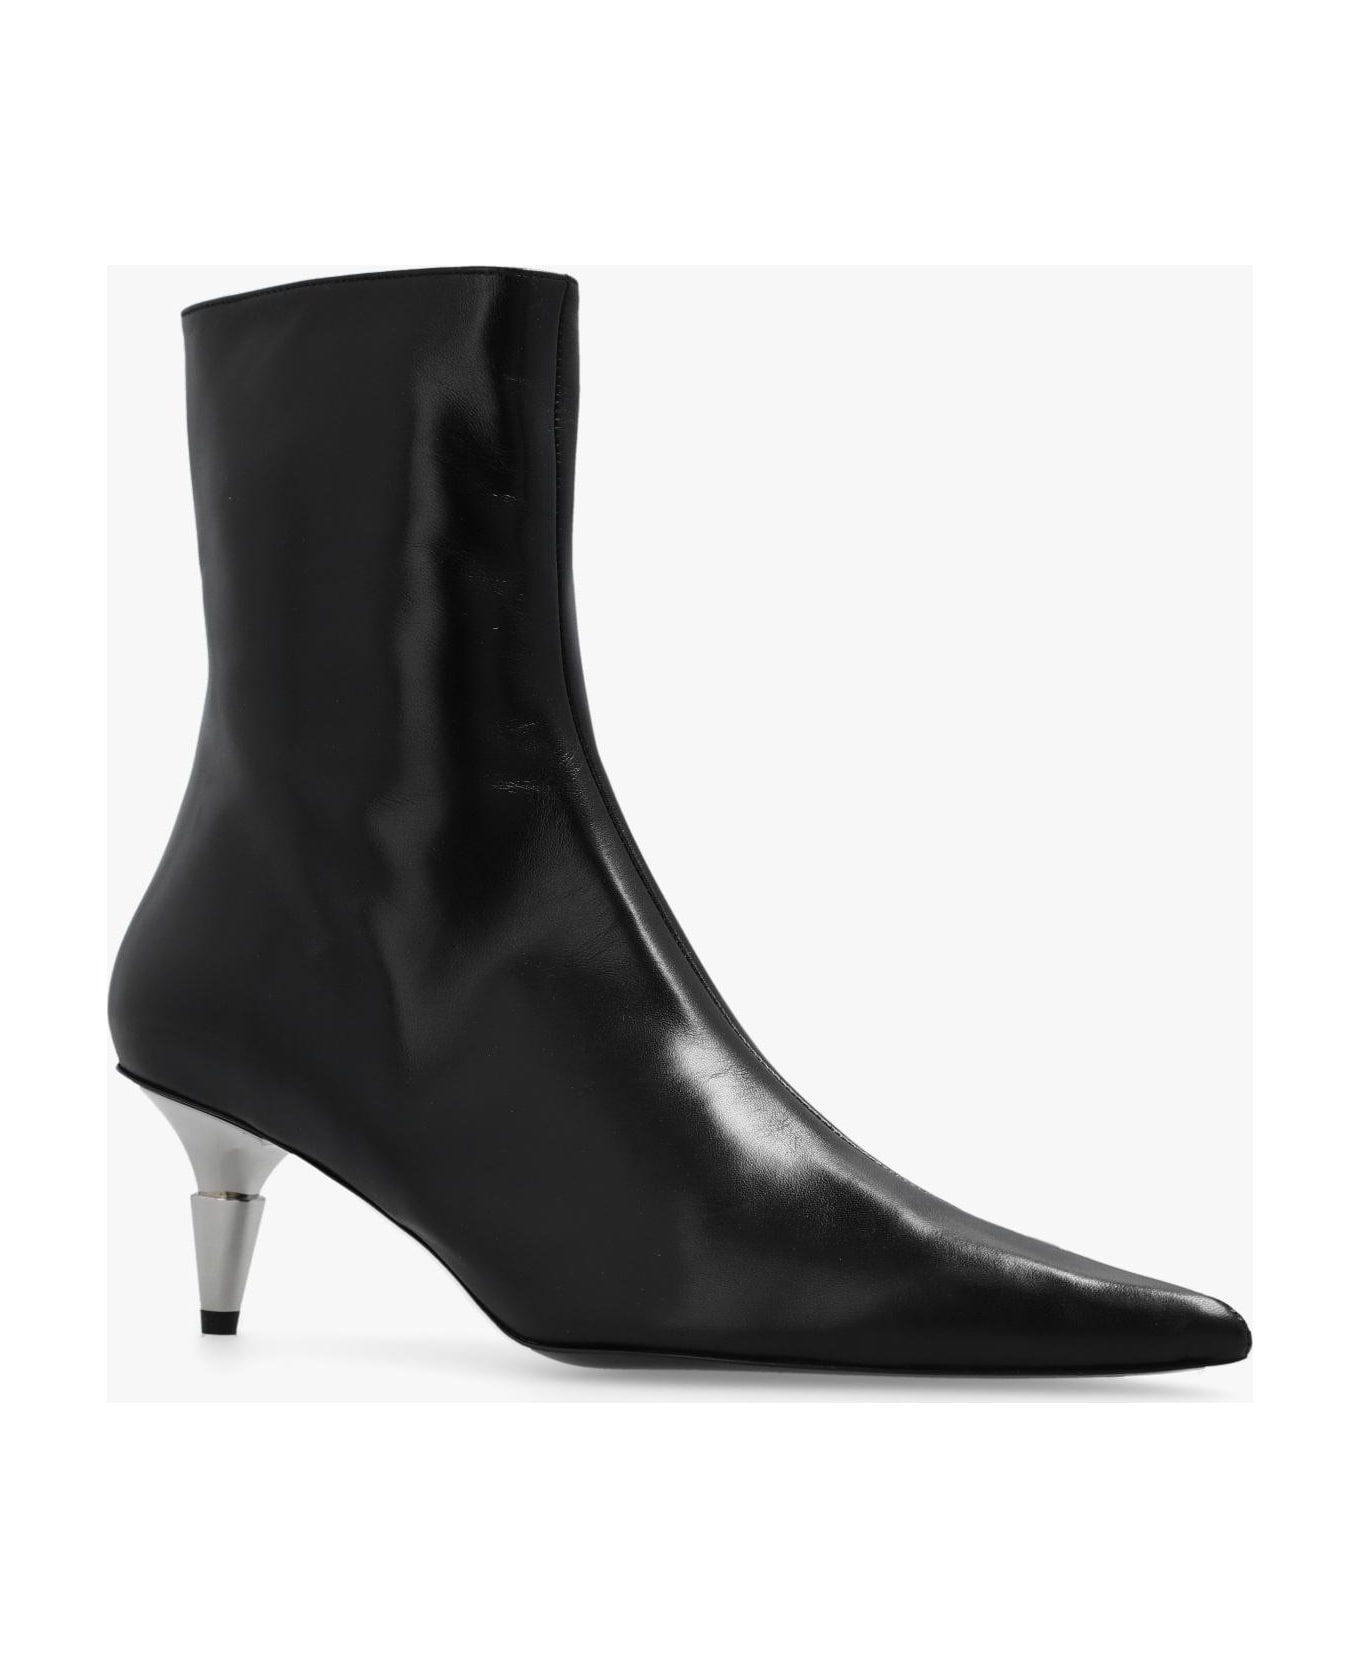 Proenza Schouler 'spike' Heeled Ankle Boots In Leather - Black ブーツ